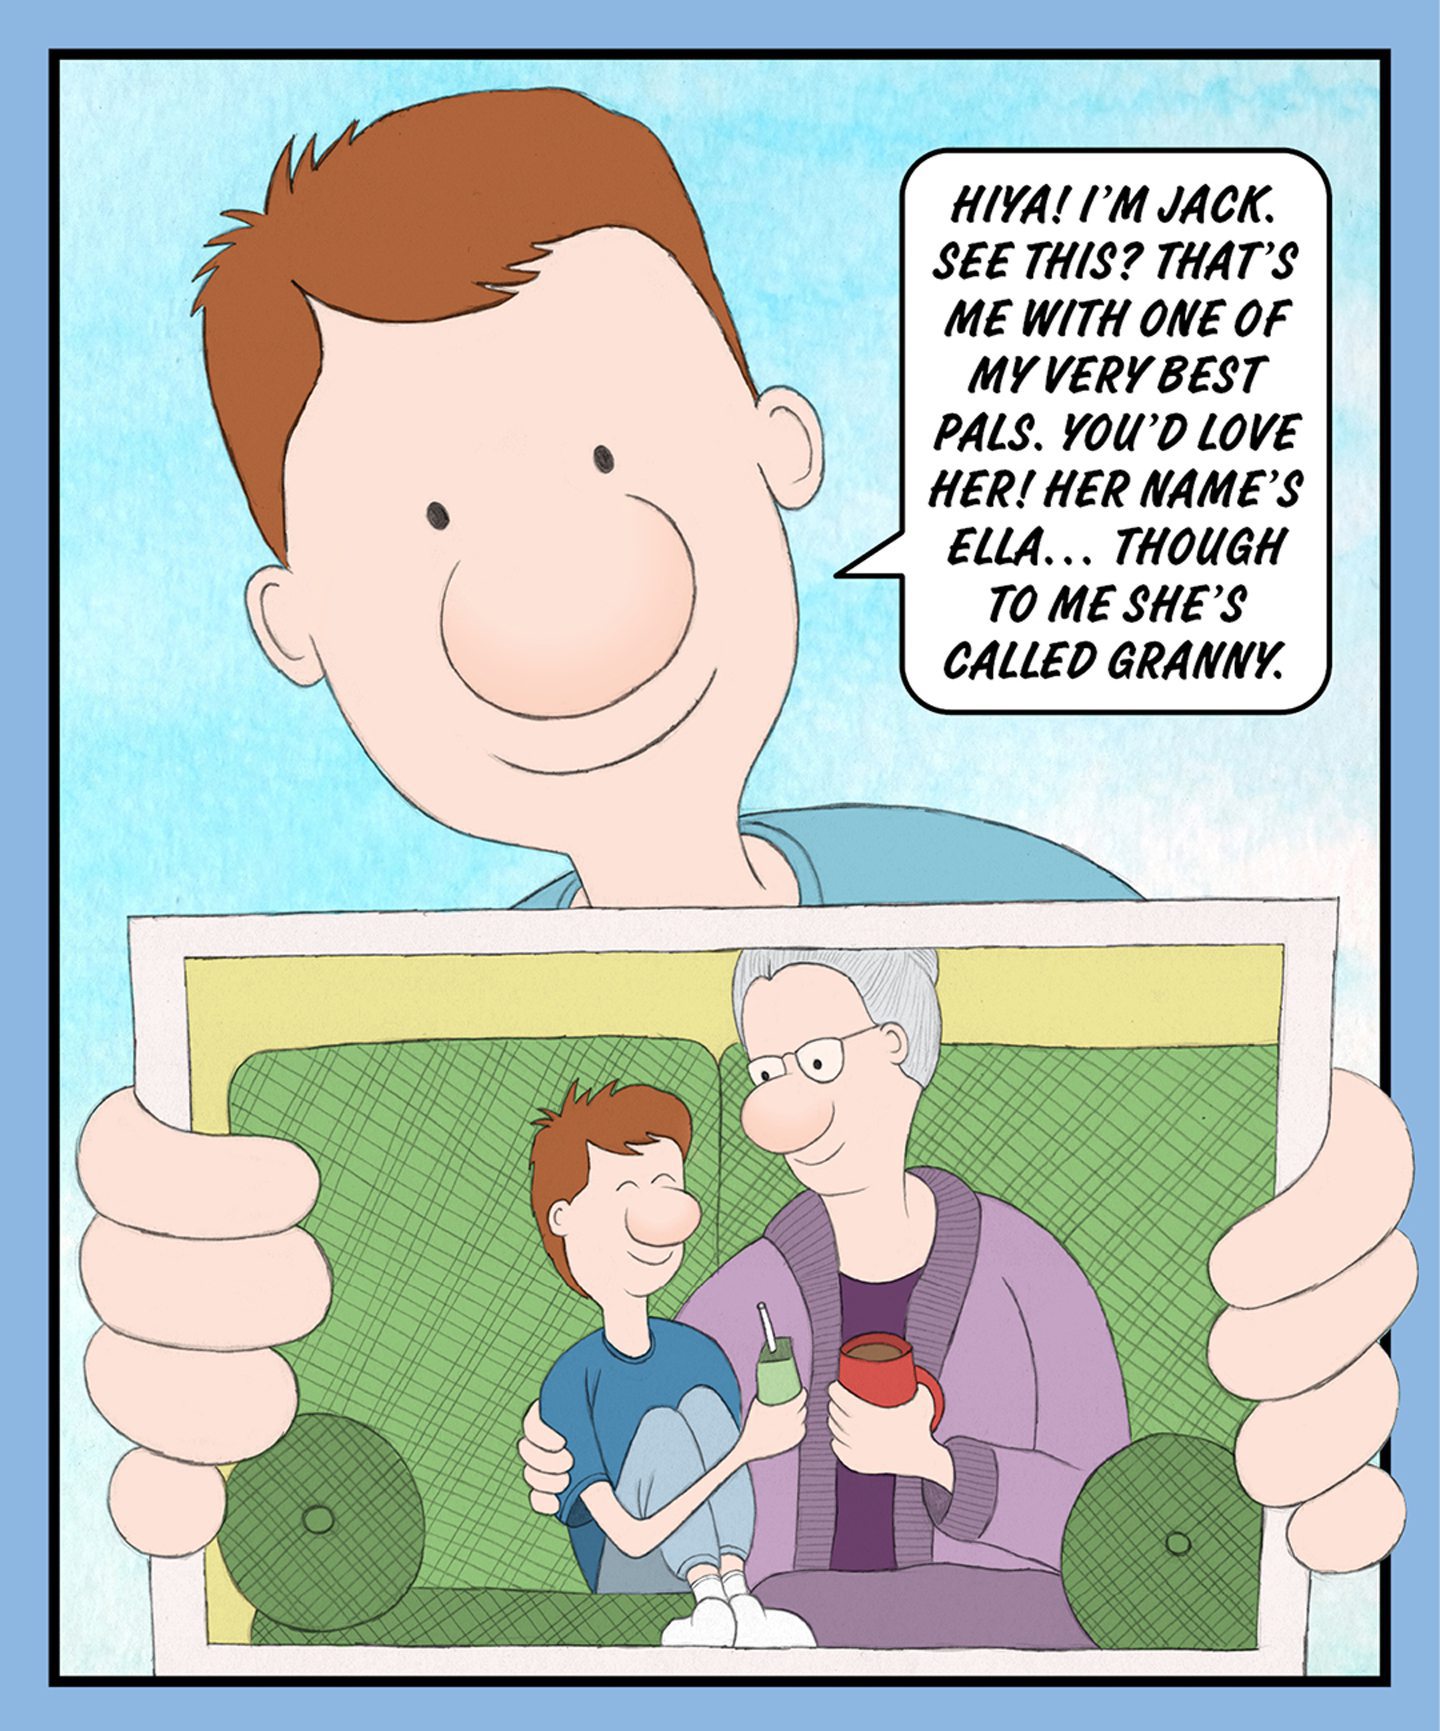 A comic illustration of a little boy holding up a photograph of him and his granny. The words read: HIYA! I'M JACK. SEE THIS? THAT'S ME WITH ONE OF MY VERY BEST PALS. YOU'D LOVE HER! HER NAME'S ELLA… THOUGH TO ME SHE'S CALLED GRANNY. 